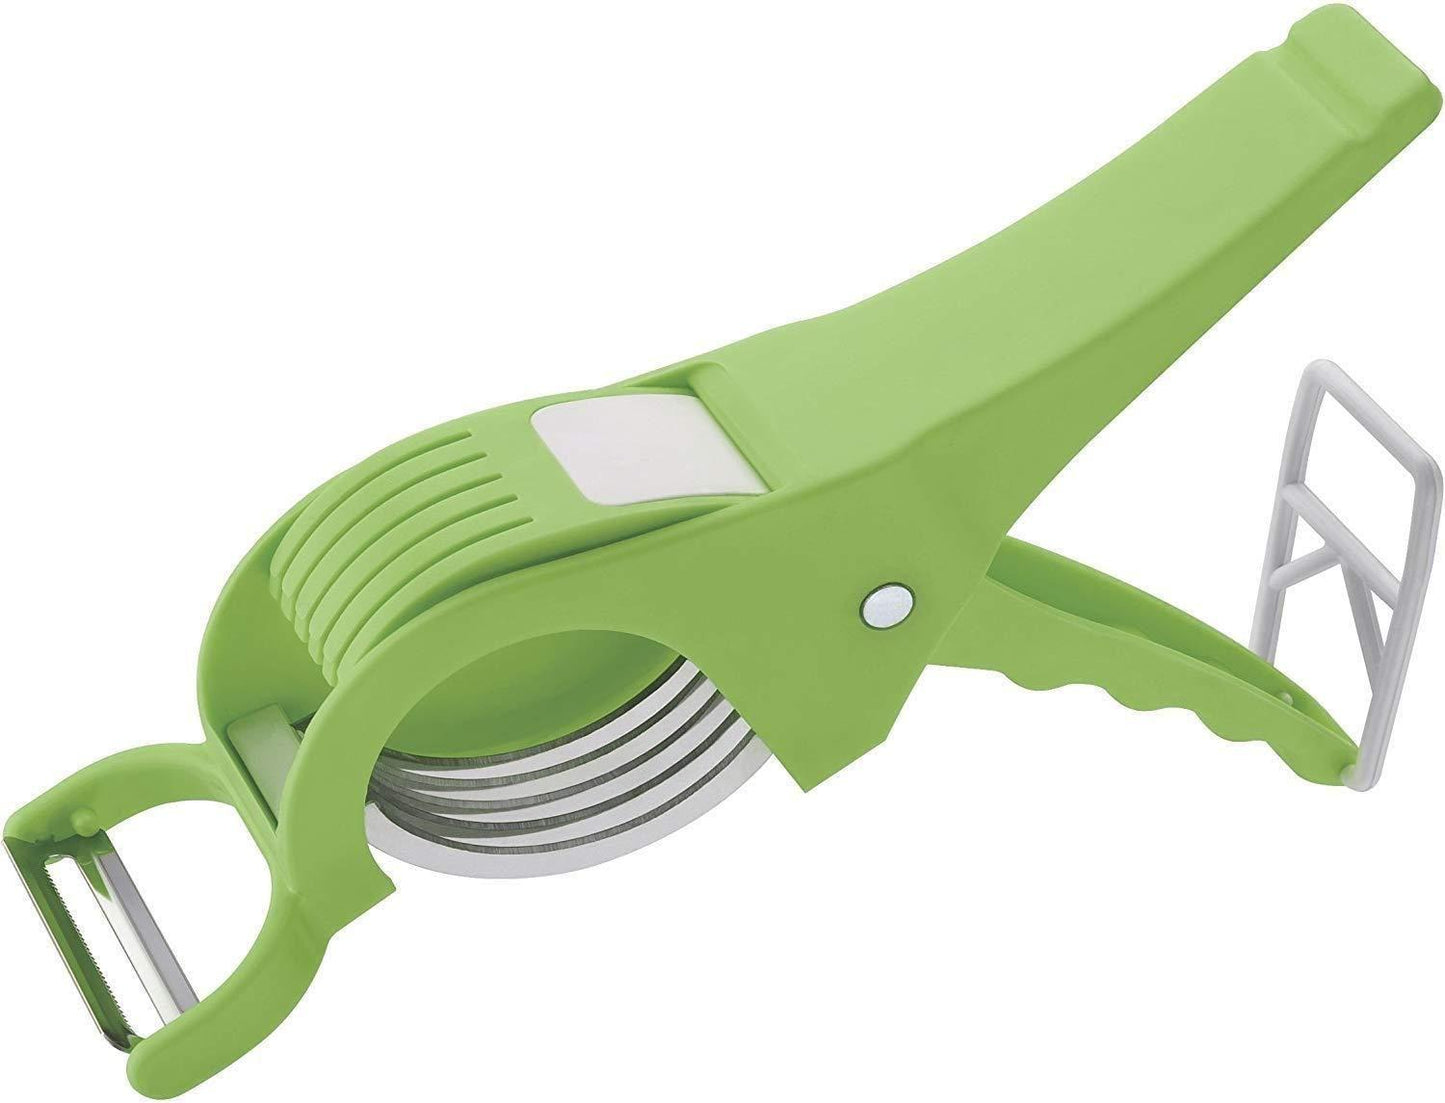 Vegetable Cutter and Peeler (2 in 1) for Kitchen